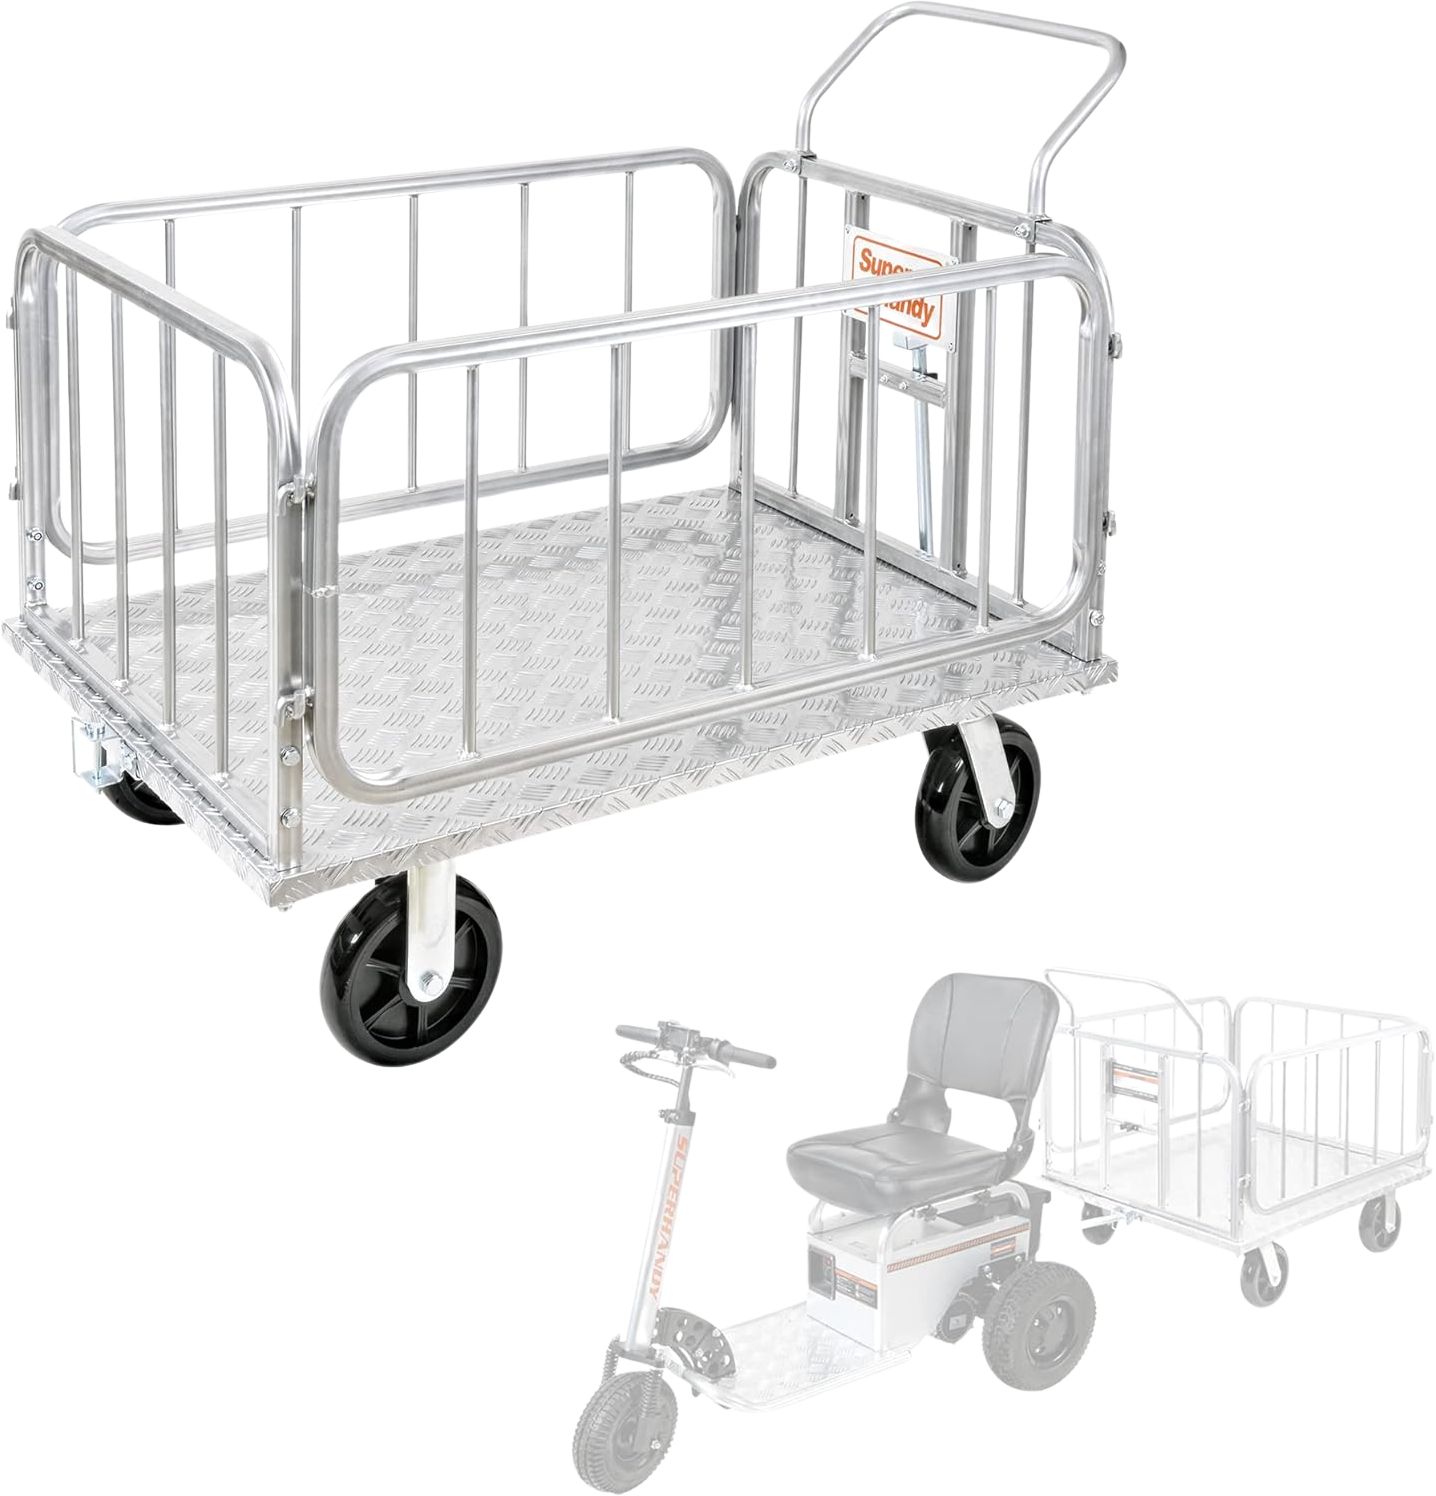 Super Handy, Super Handy GUO099 Cargo Trailer Utility Cart 1200 lbs Capacity with Hitch 8" Casters Compatible with Electric Tugger New